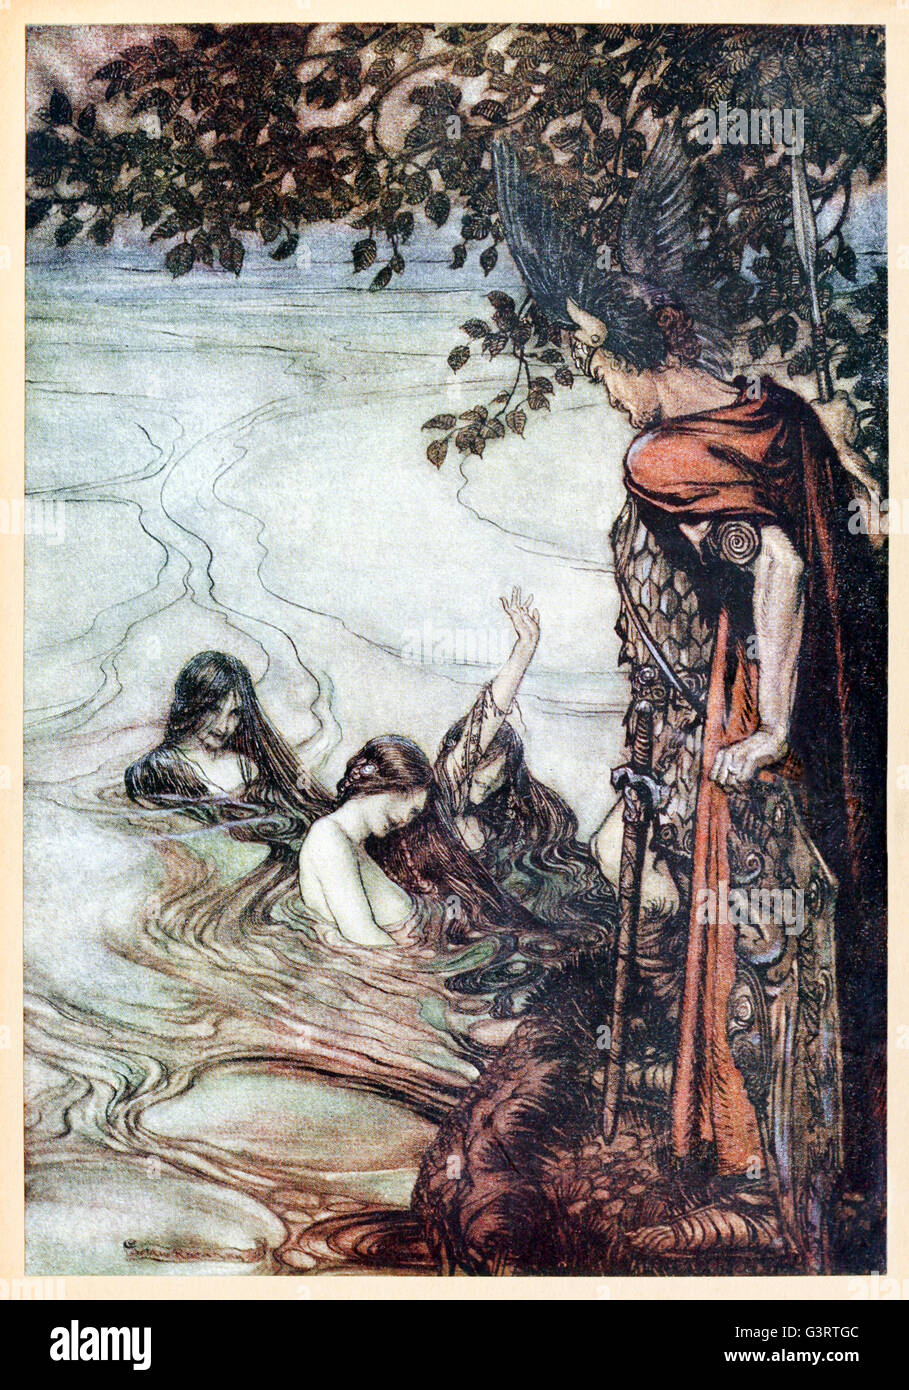 “Though gaily ye may laugh, In grief ye shall be left, For, mocking maids, this ring Ye ask shall never be yours” from 'Siegfried & The Twilight of the Gods' illustrated by Arthur Rackham (1867-1939). See description for more information. Stock Photo